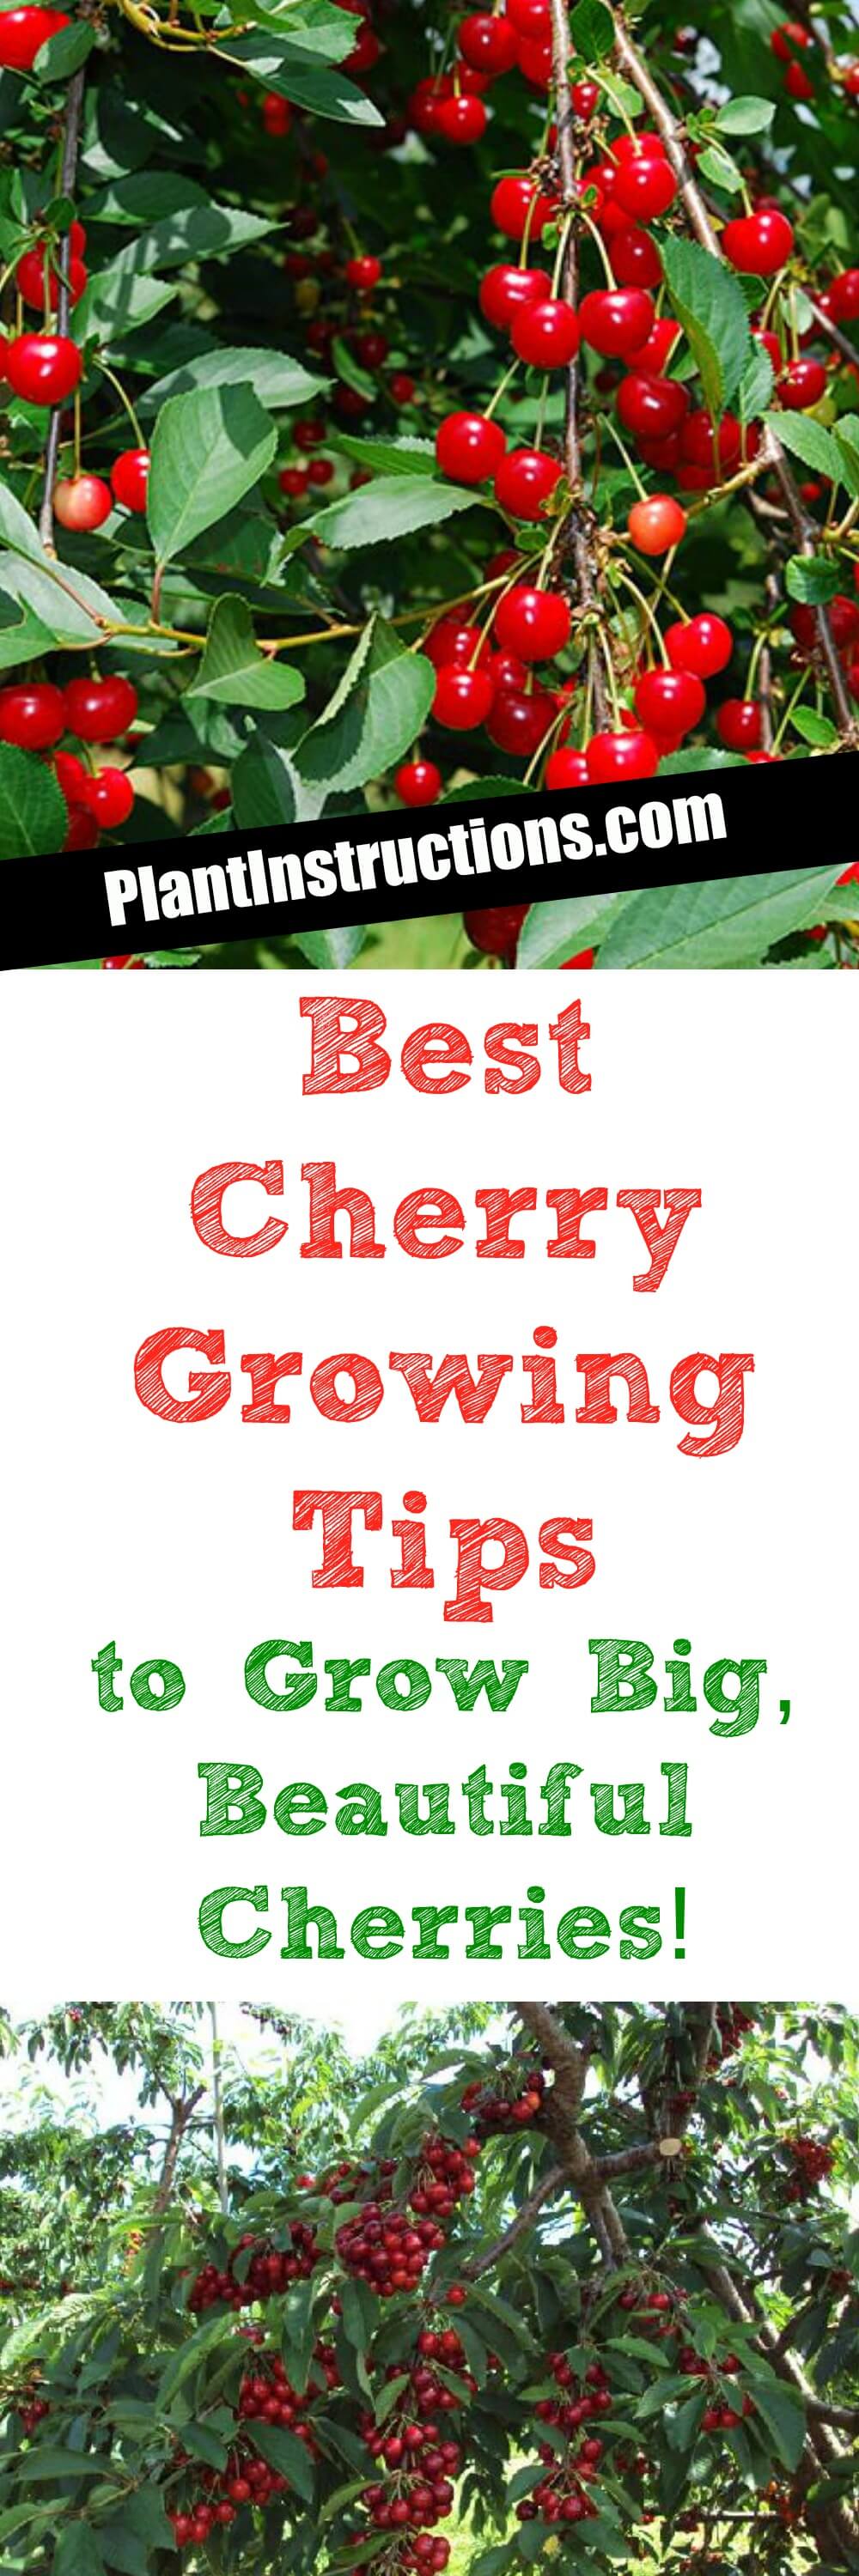 Cherry Growing Tips How To Grow Healthy Delicious Cherry Tree Plant Instructions